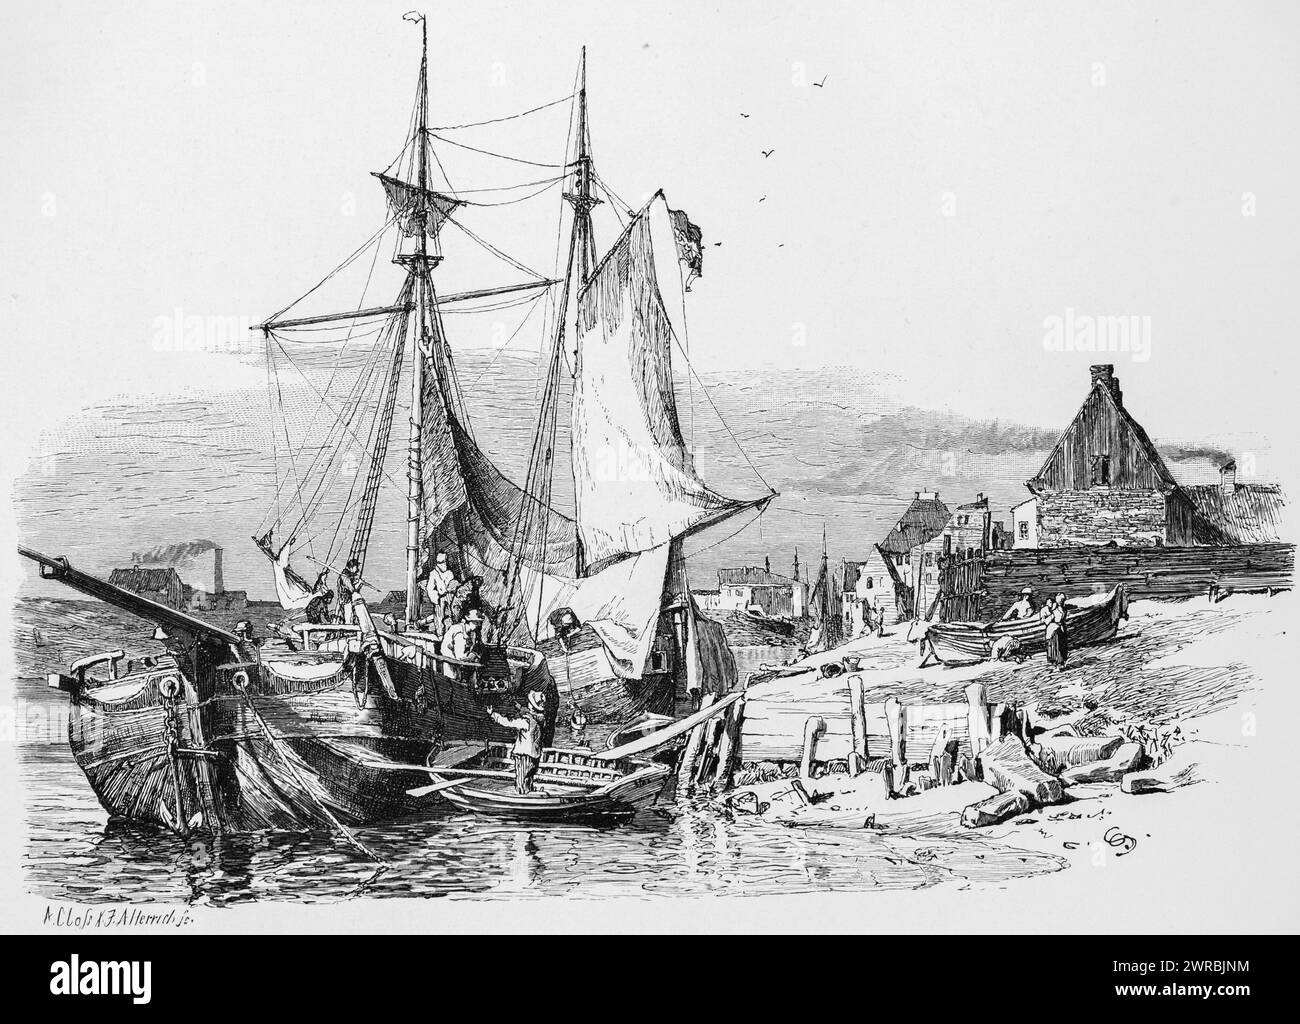 Kuffen, Kuff, historical ship type, gaff sails and square sails, goods transport near the coast, town, rowing boat, shore, people, North Sea Stock Photo